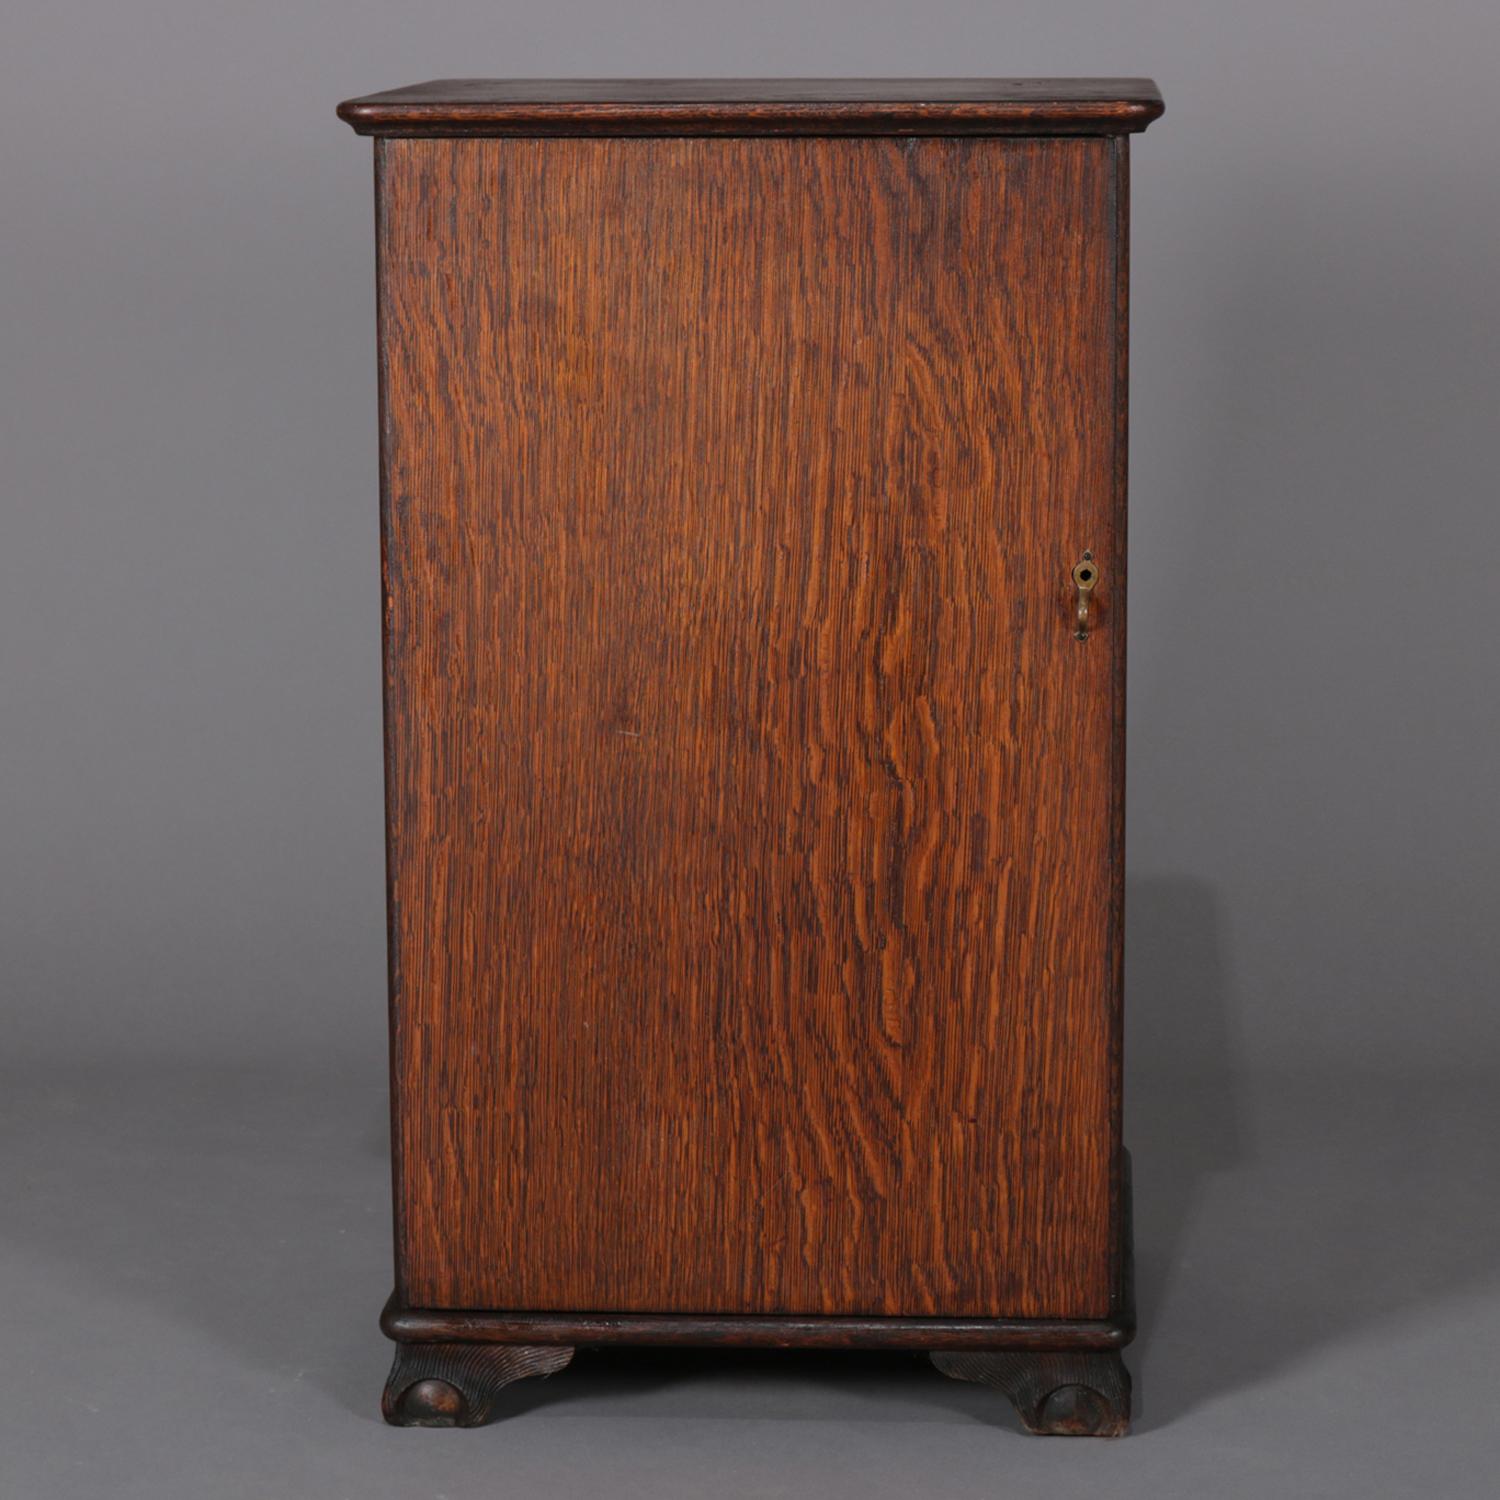 Antique Arts & Crafts mission oak Edison cylinder and phonograph cabinet features single door opening to adjustable shelf interior with two shelves and seated on carved stylized claw and ball feet, circa 1910.

Measures: 35